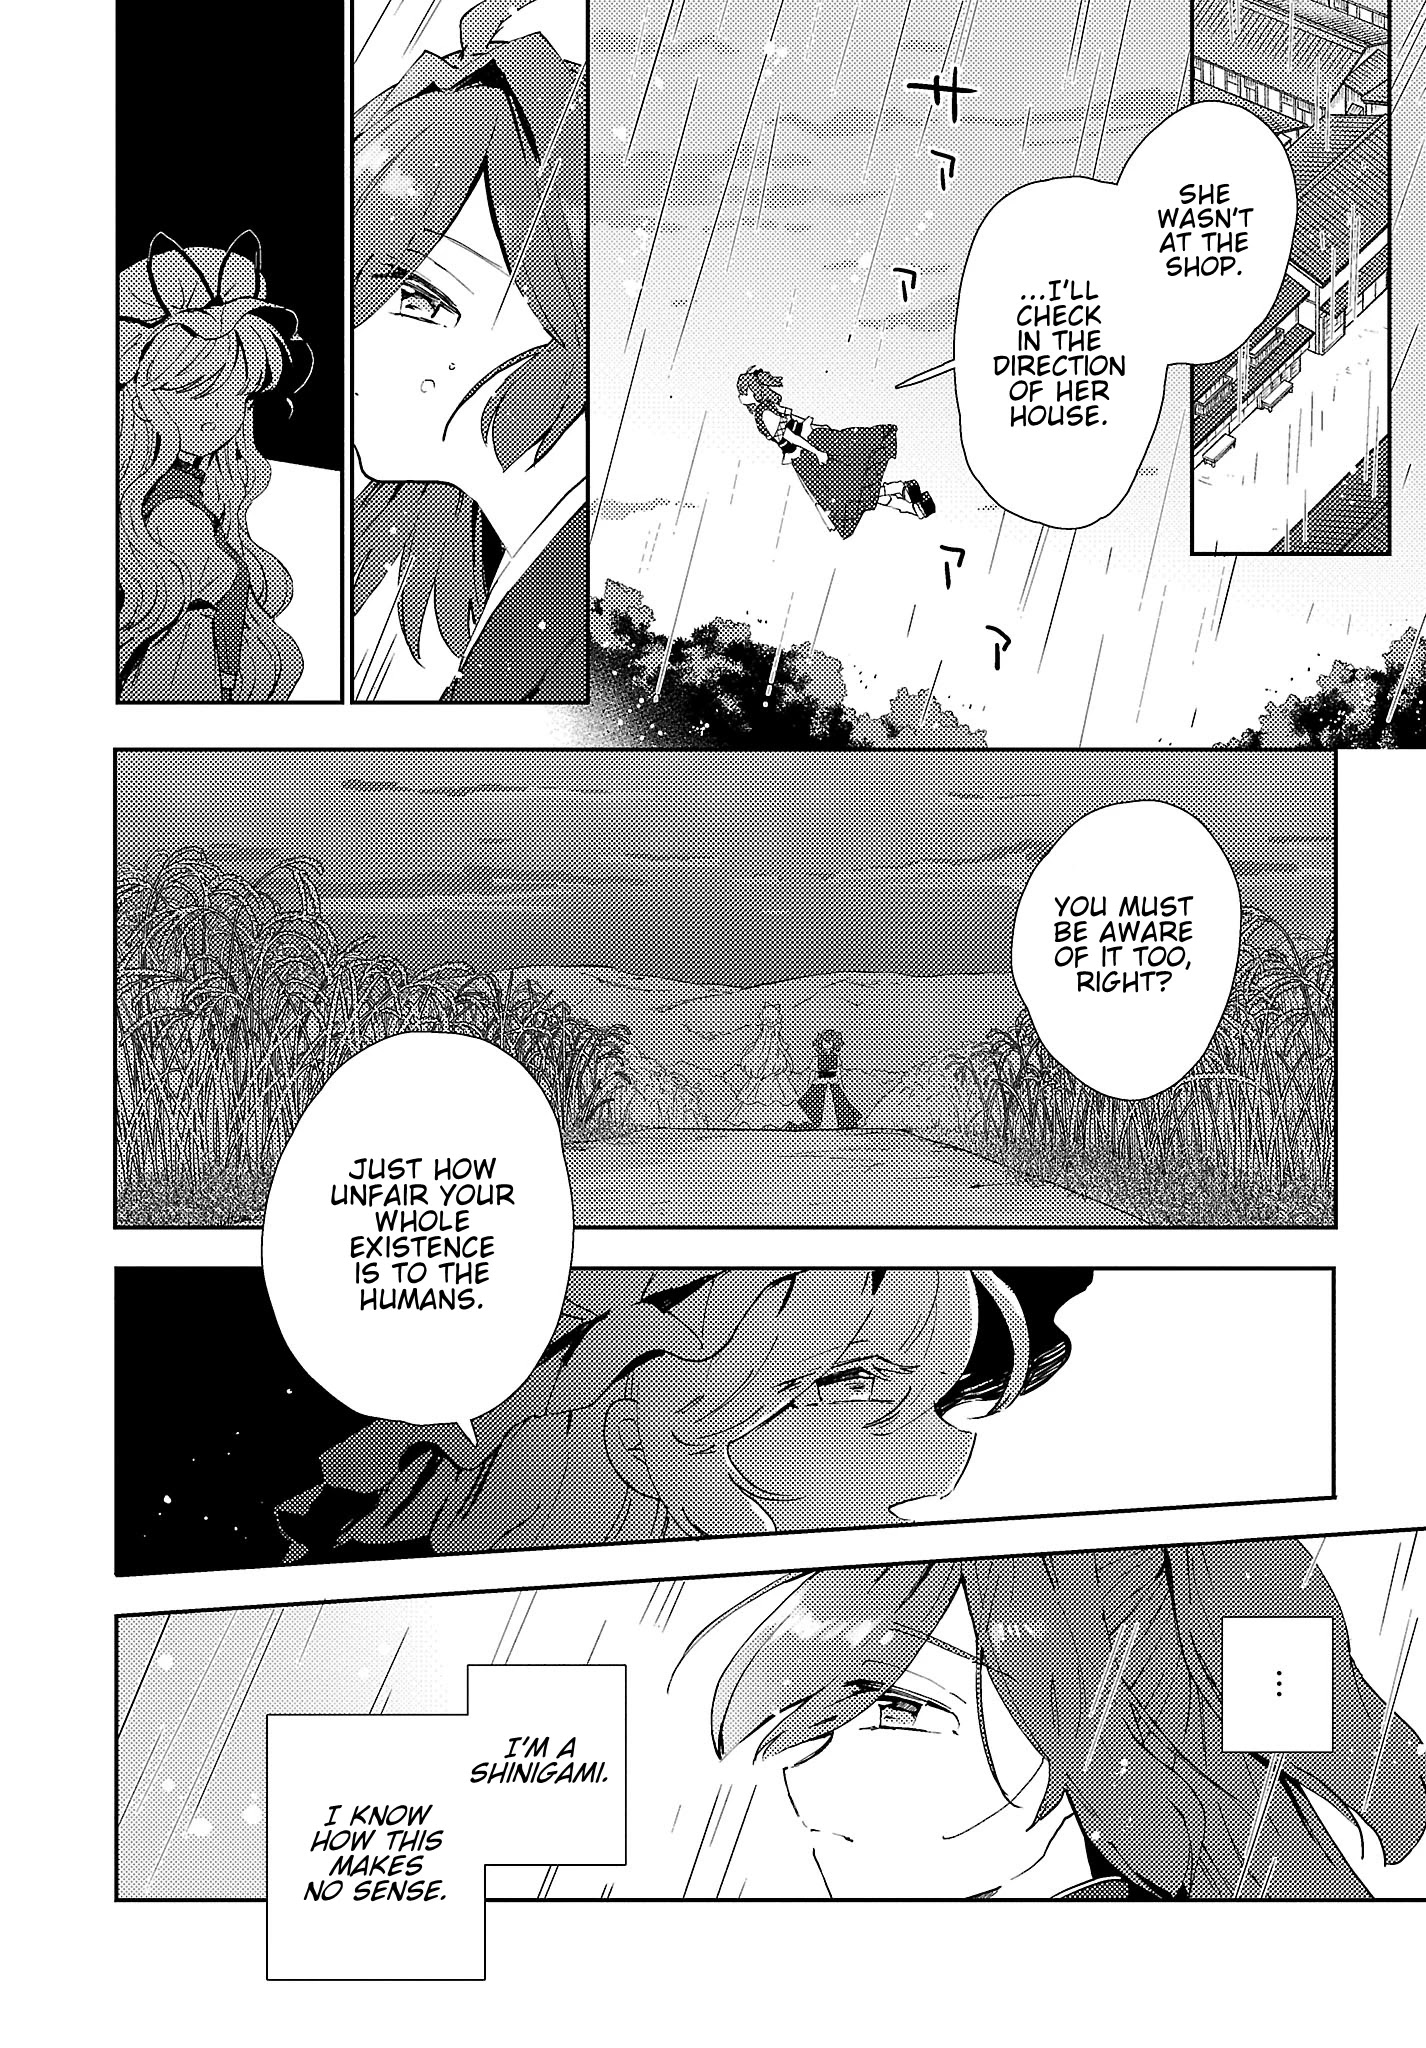 The Shinigami's Rowing Her Boat As Usual - Touhou - Page 4